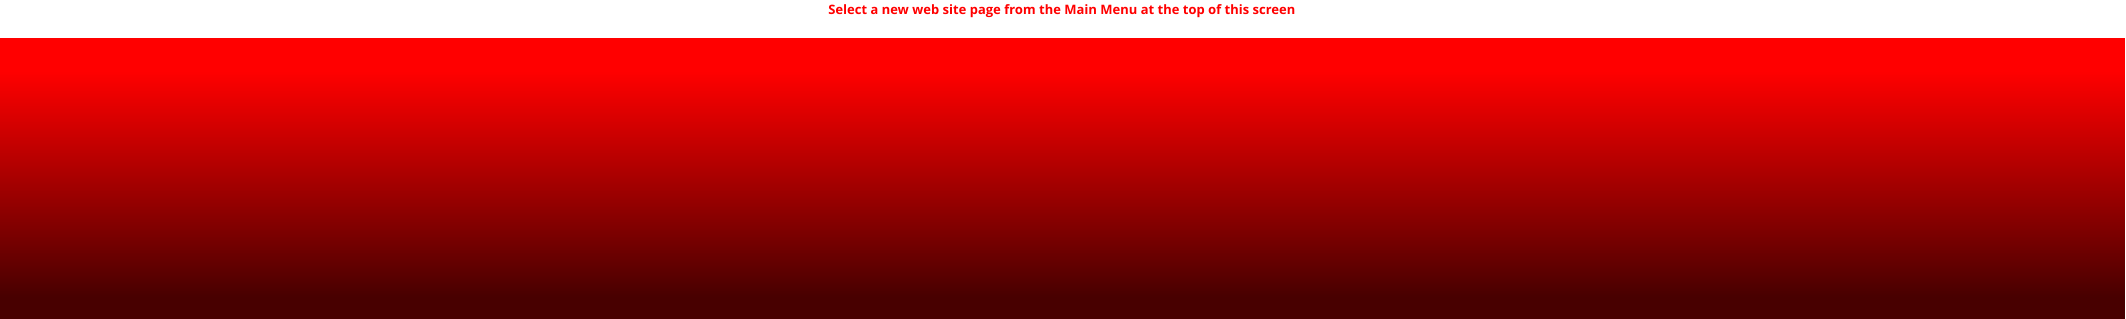 Select a new web site page from the Main Menu at the top of this screen